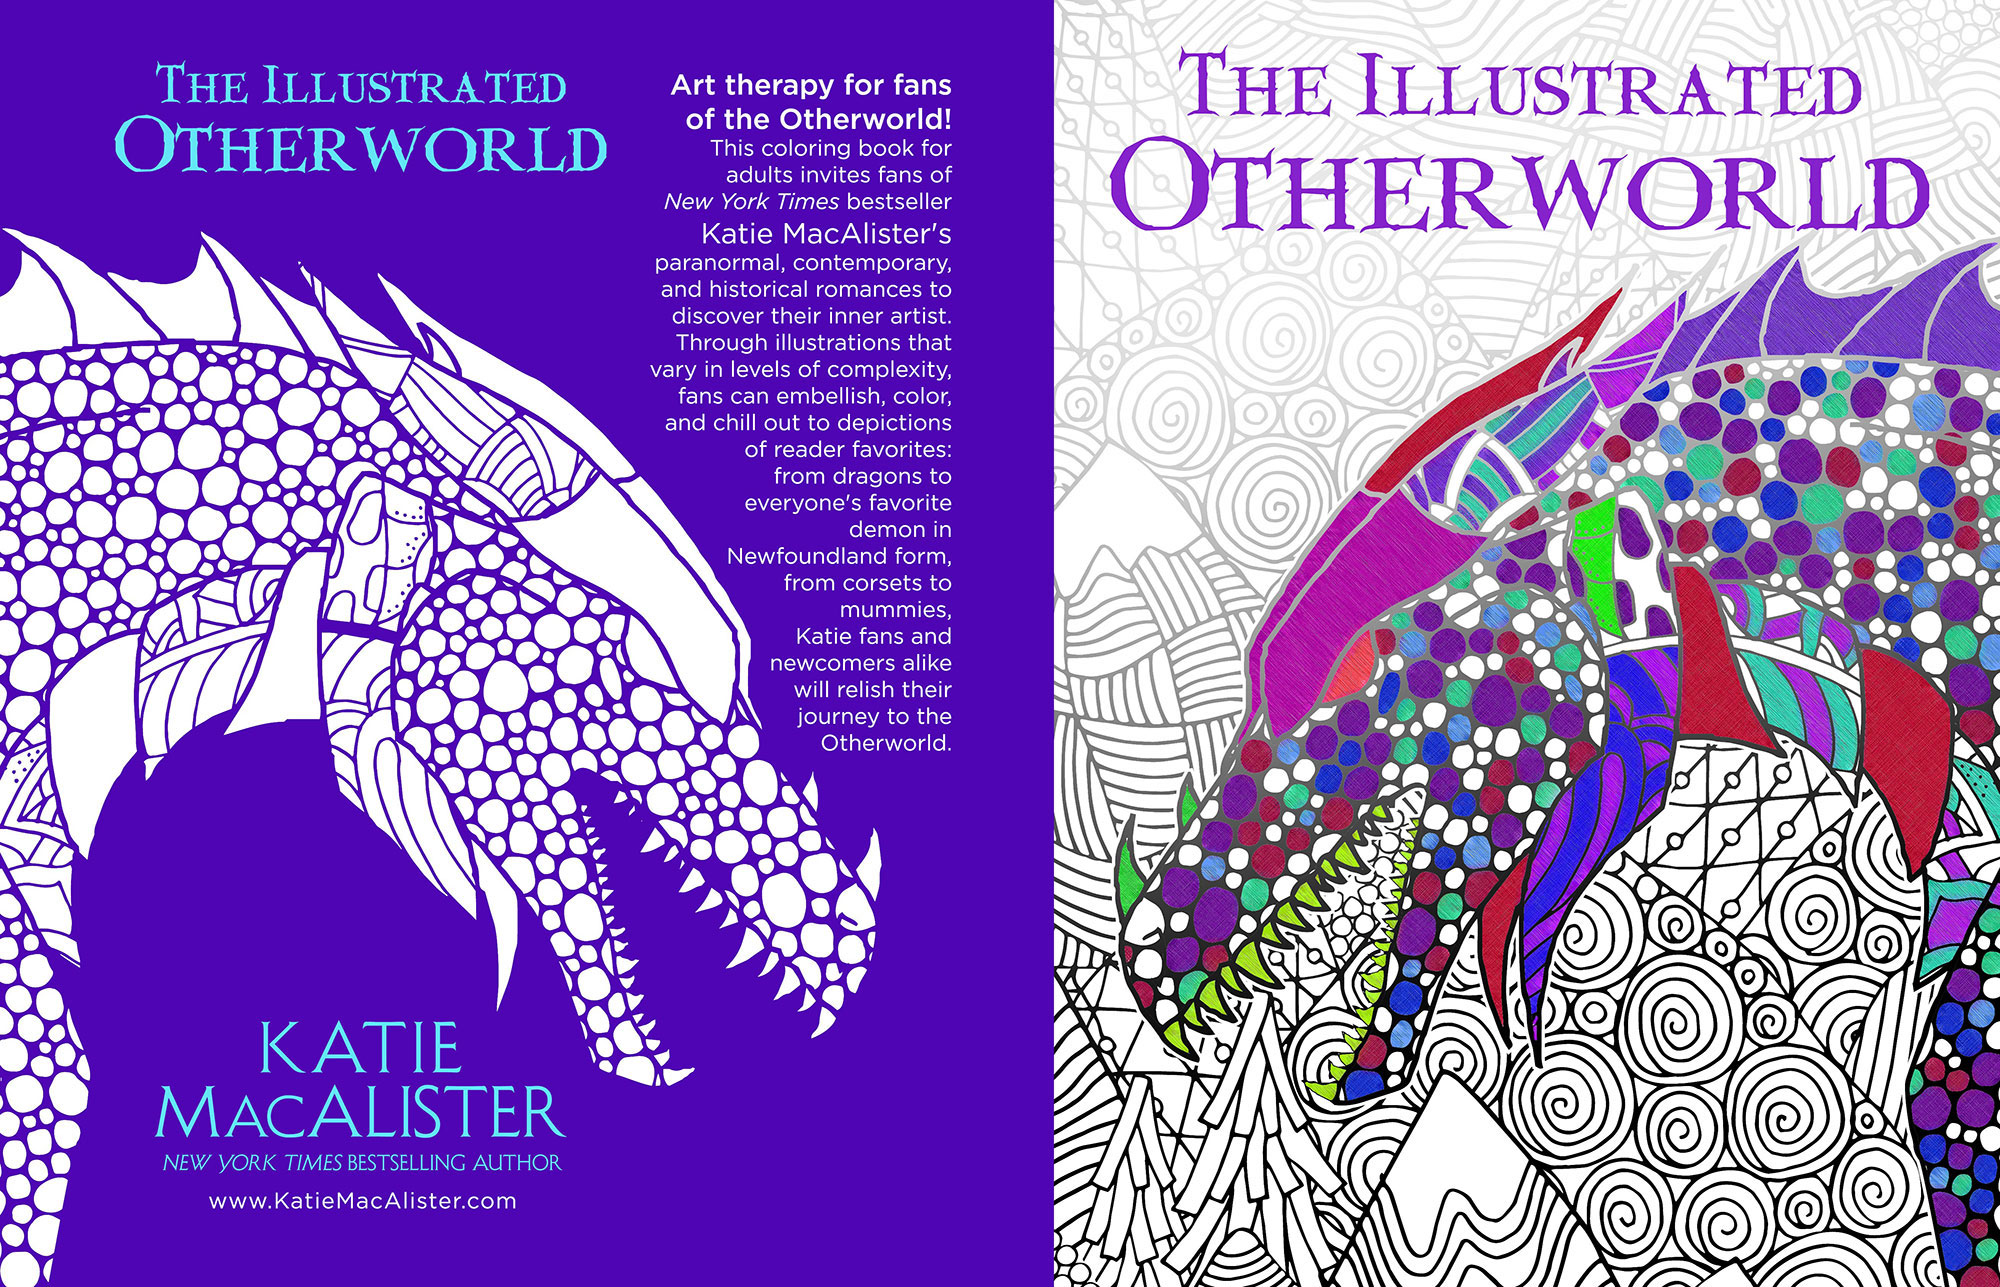 The Illustrated Otherworld by Katie MacAlister (Print Coverflat)